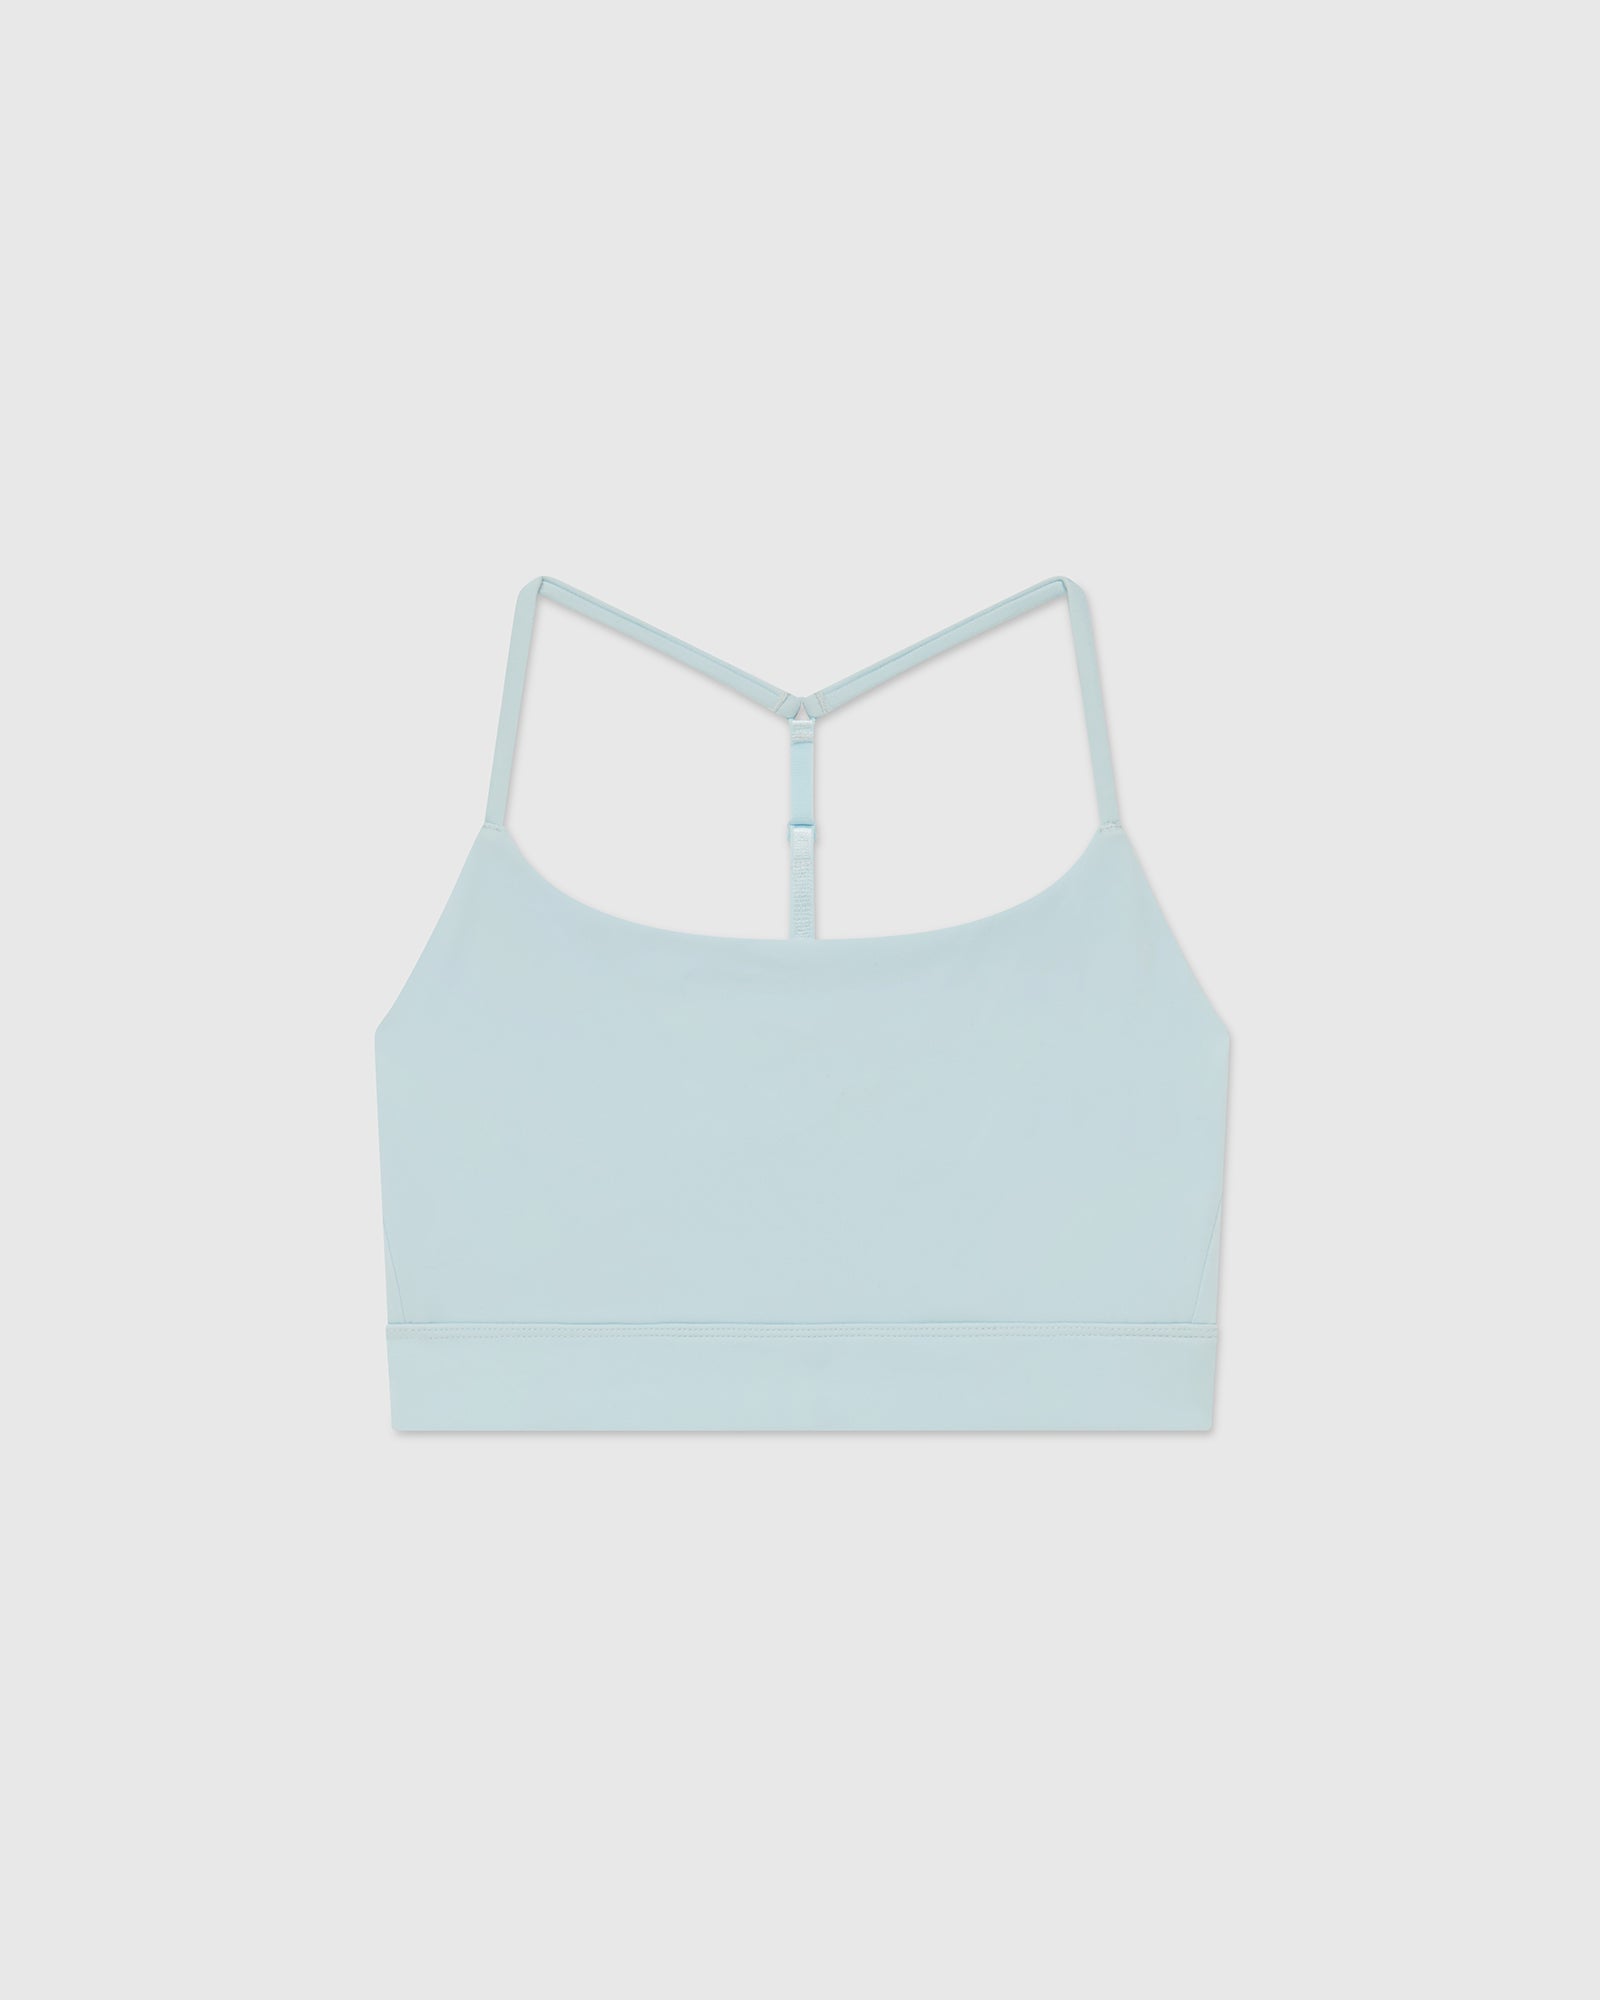 H&M Cami Bras for Women